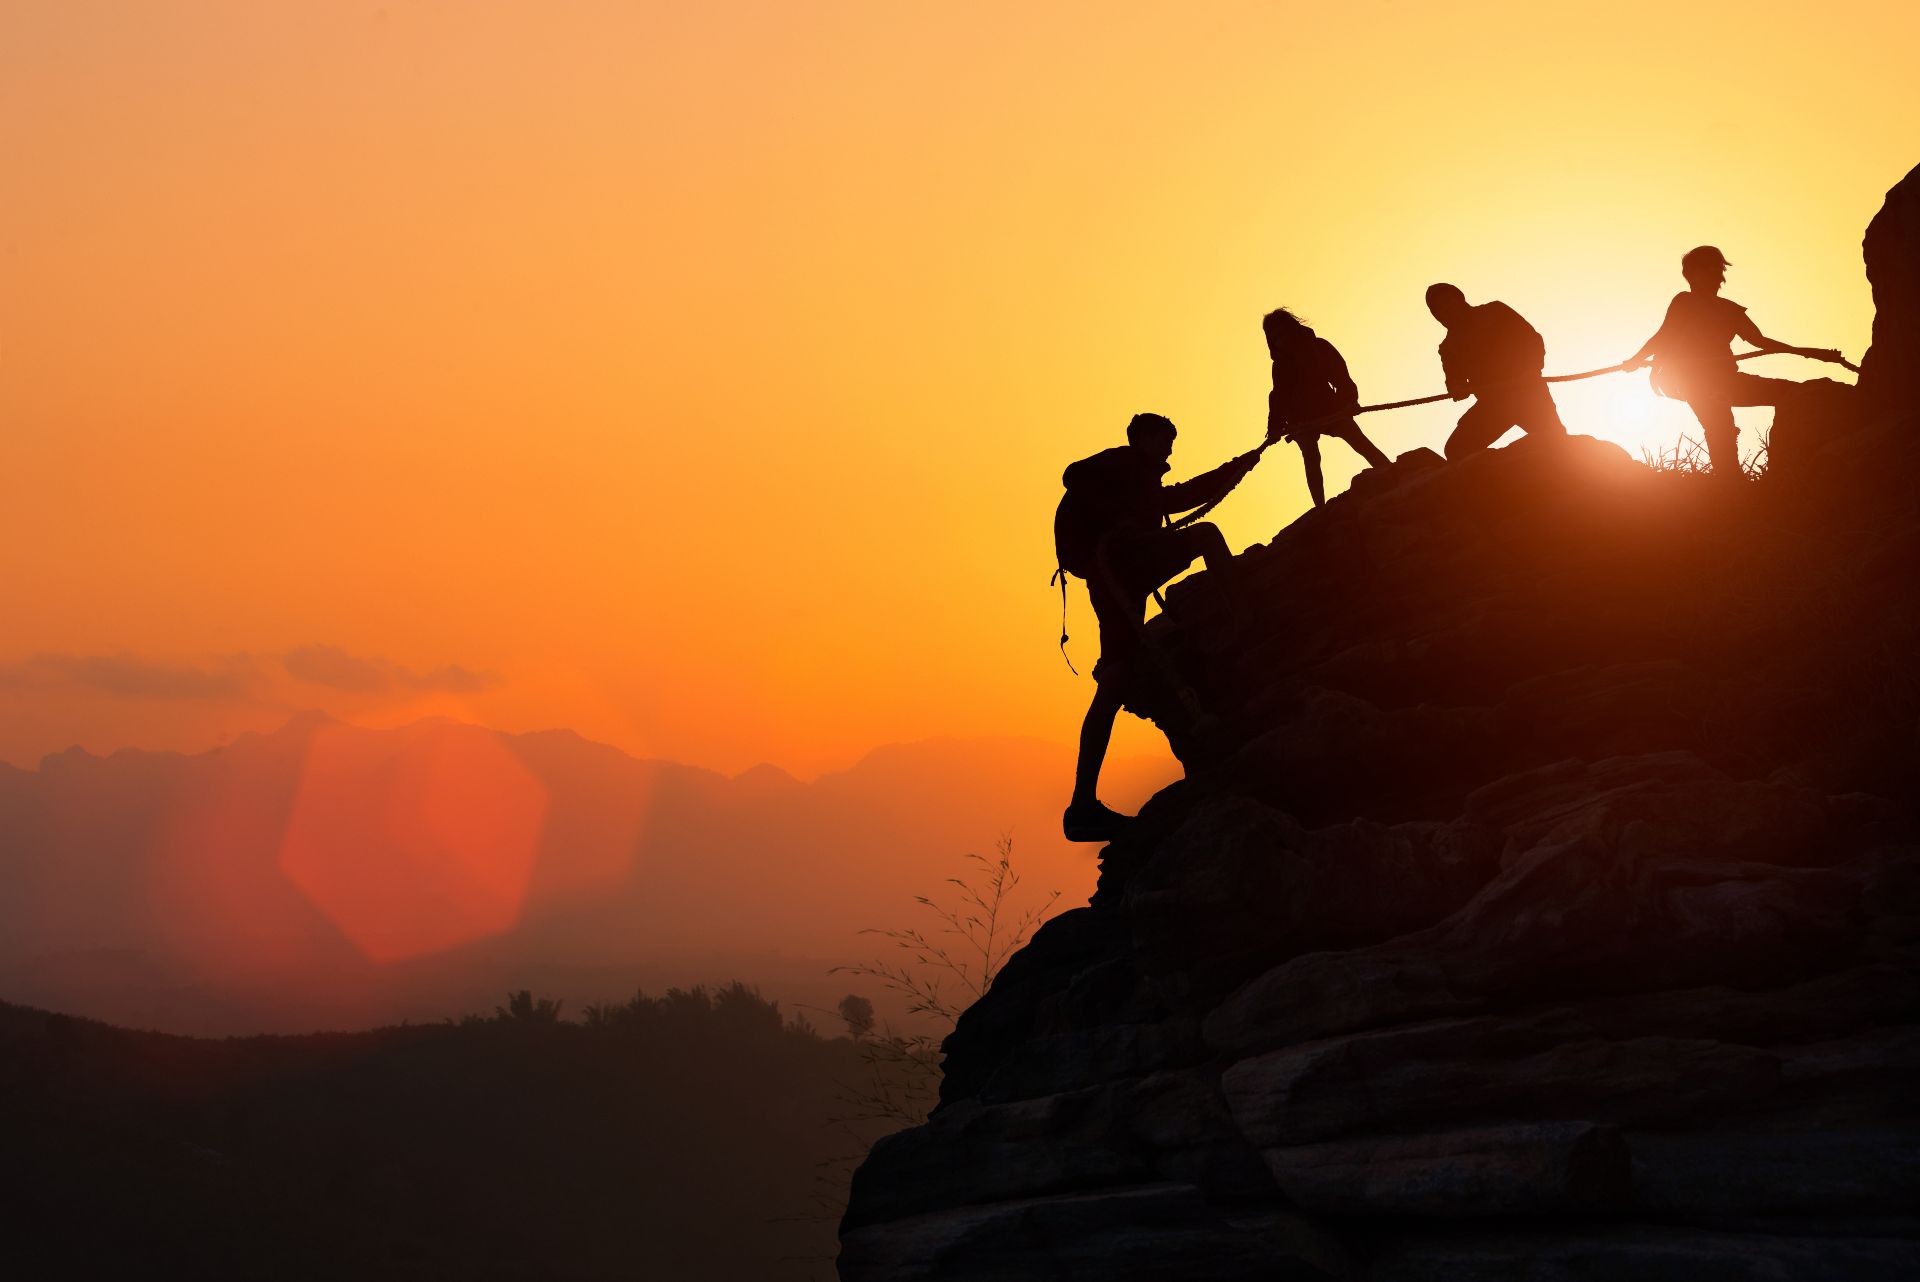 People climbing a rock together with a rope at sunset